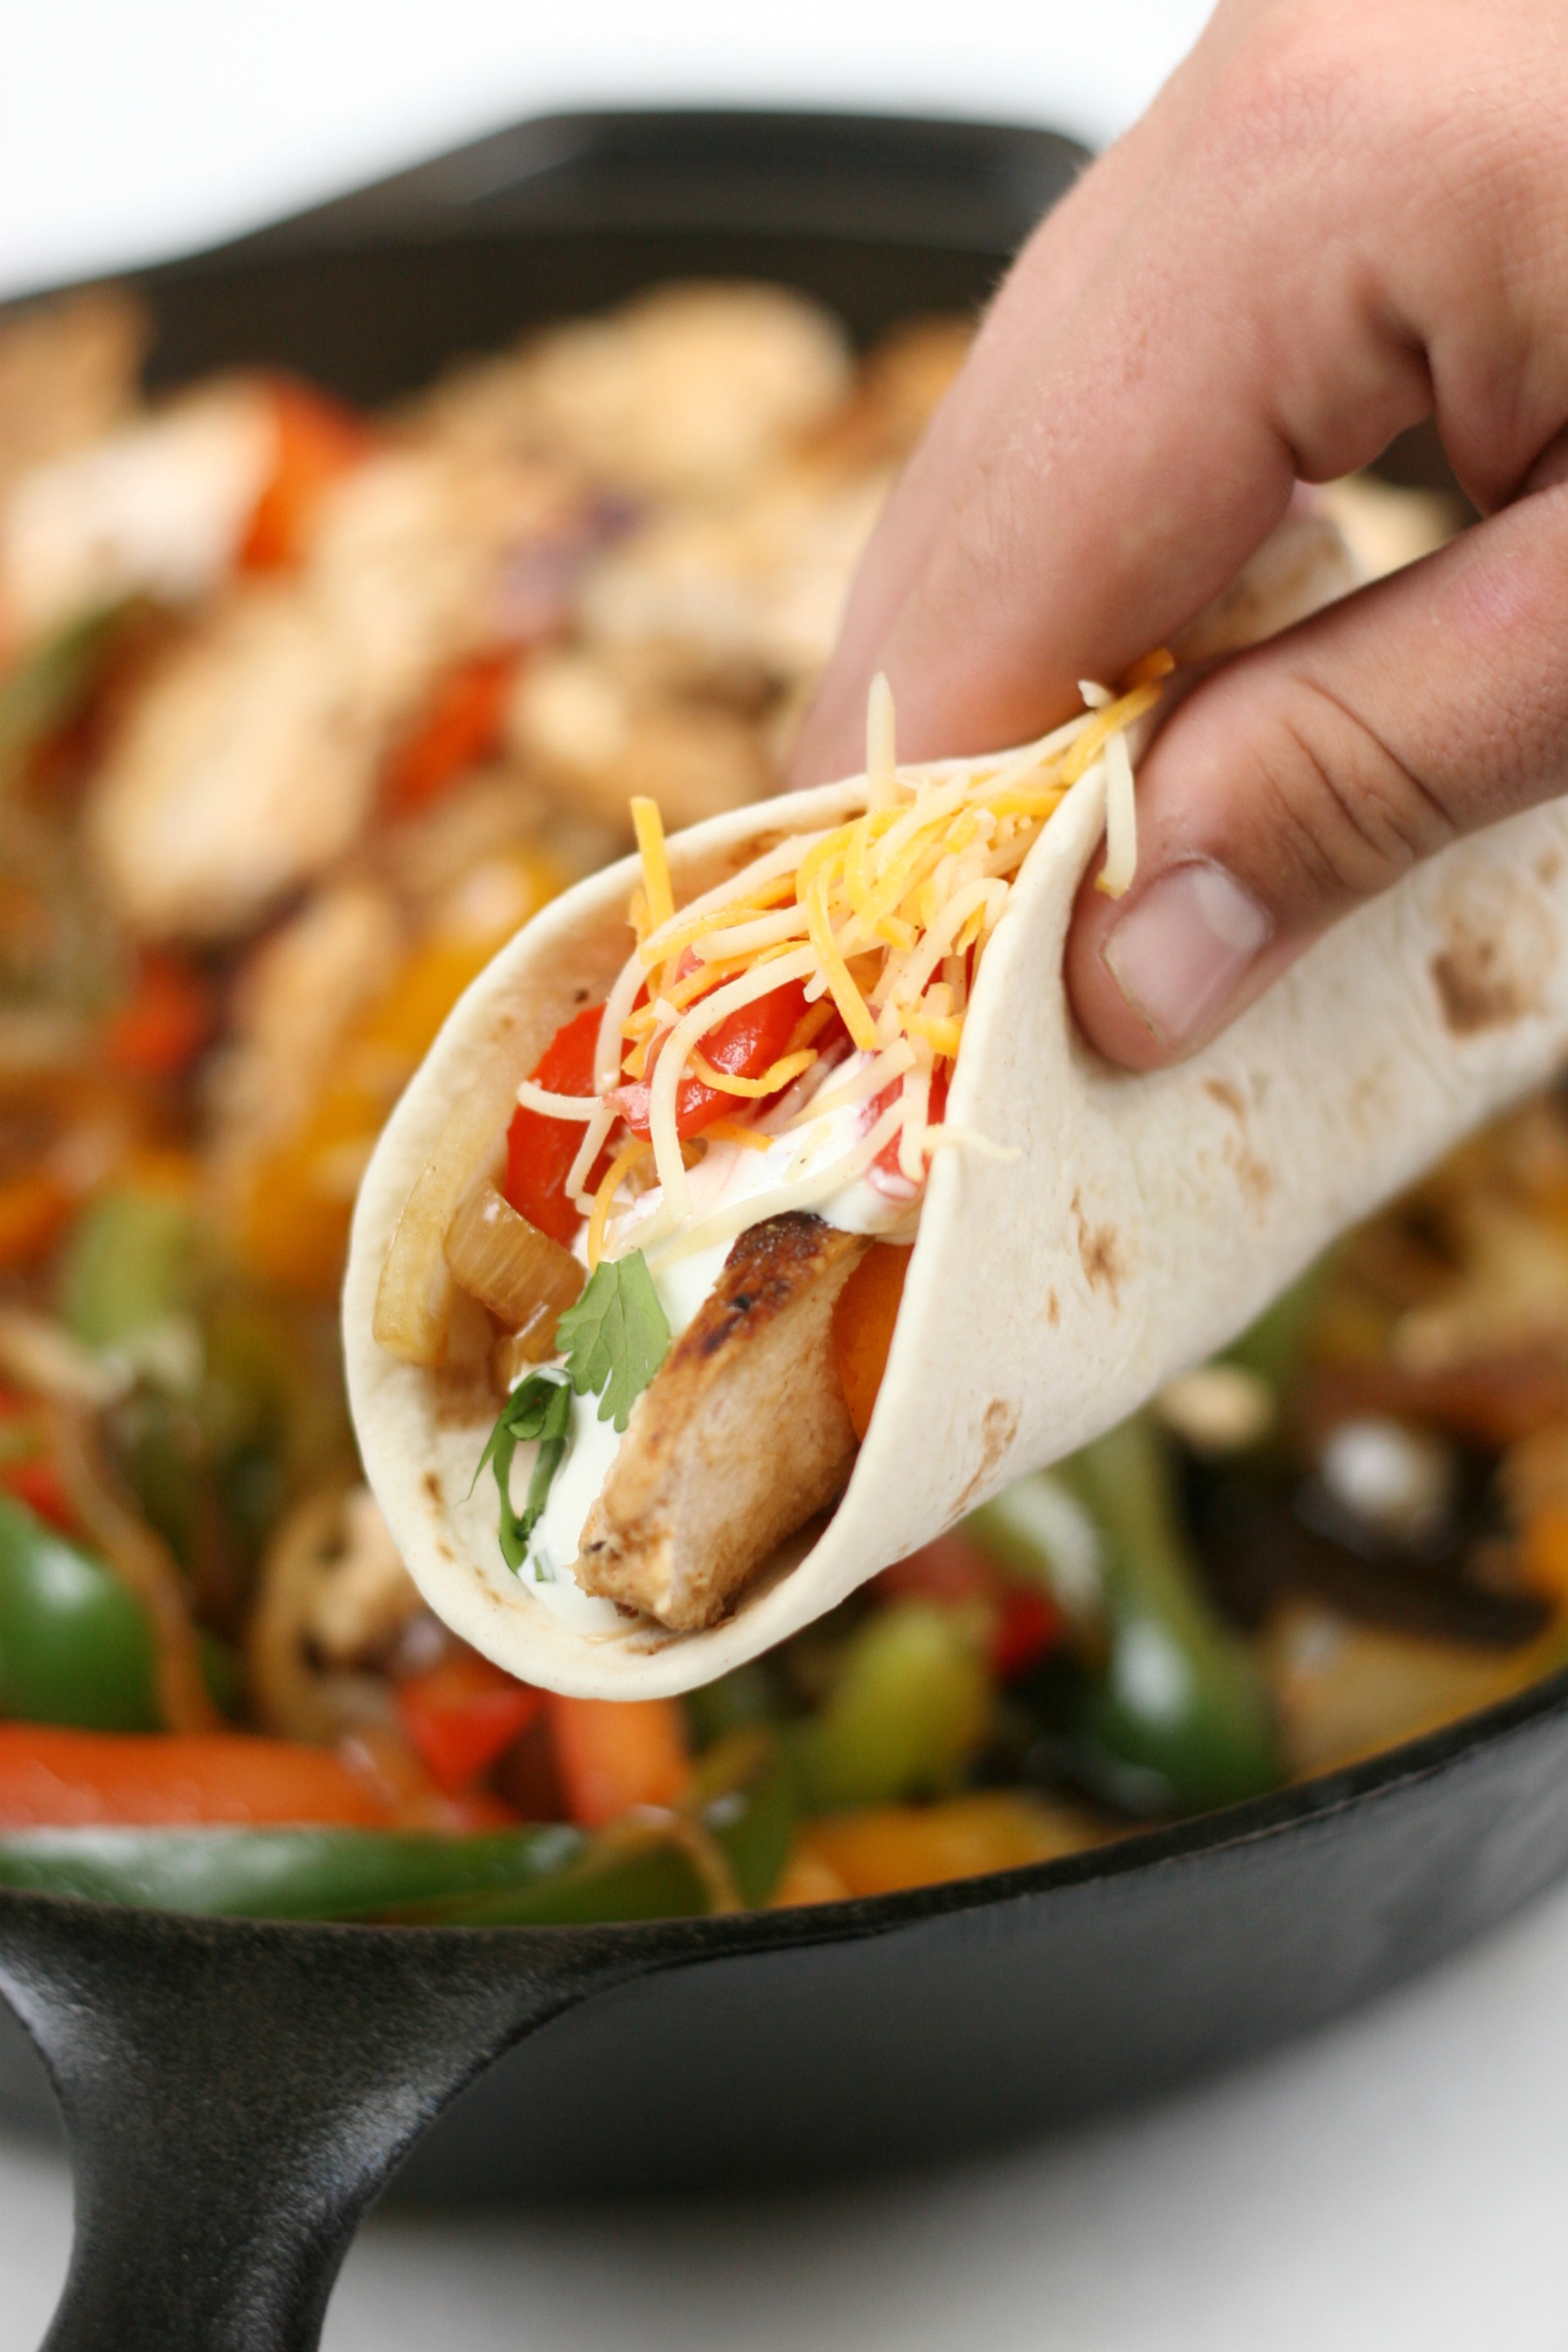 hand holding a chicken fajita with cast iron skillet with onions, peppers, and grilled chicken in the background.